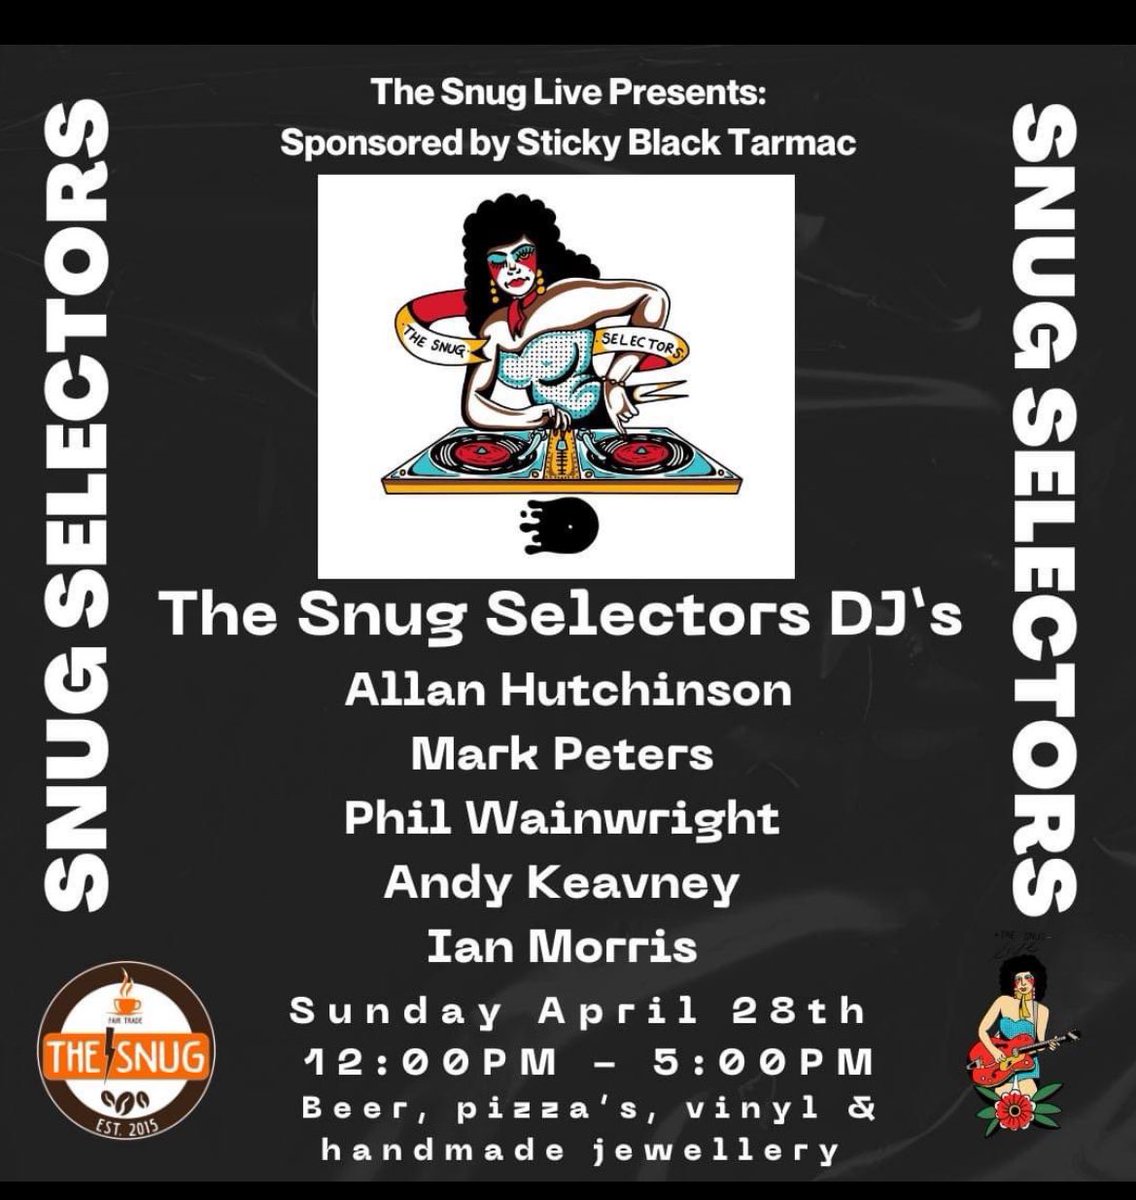 Join us this Sunday for a fantastic lineup of DJs spinning the best tunes all day long alongside @stickyblacktar🕺💃 🗓️ Date: THIS SUNDAY 🕒 Time: 12PM - 5PM 📍 Venue: The Snug Featuring Djs: Allan Hutchinson @talktopeters Phil Wainwright Andy Keavney Ian Morris FREE EVENT!